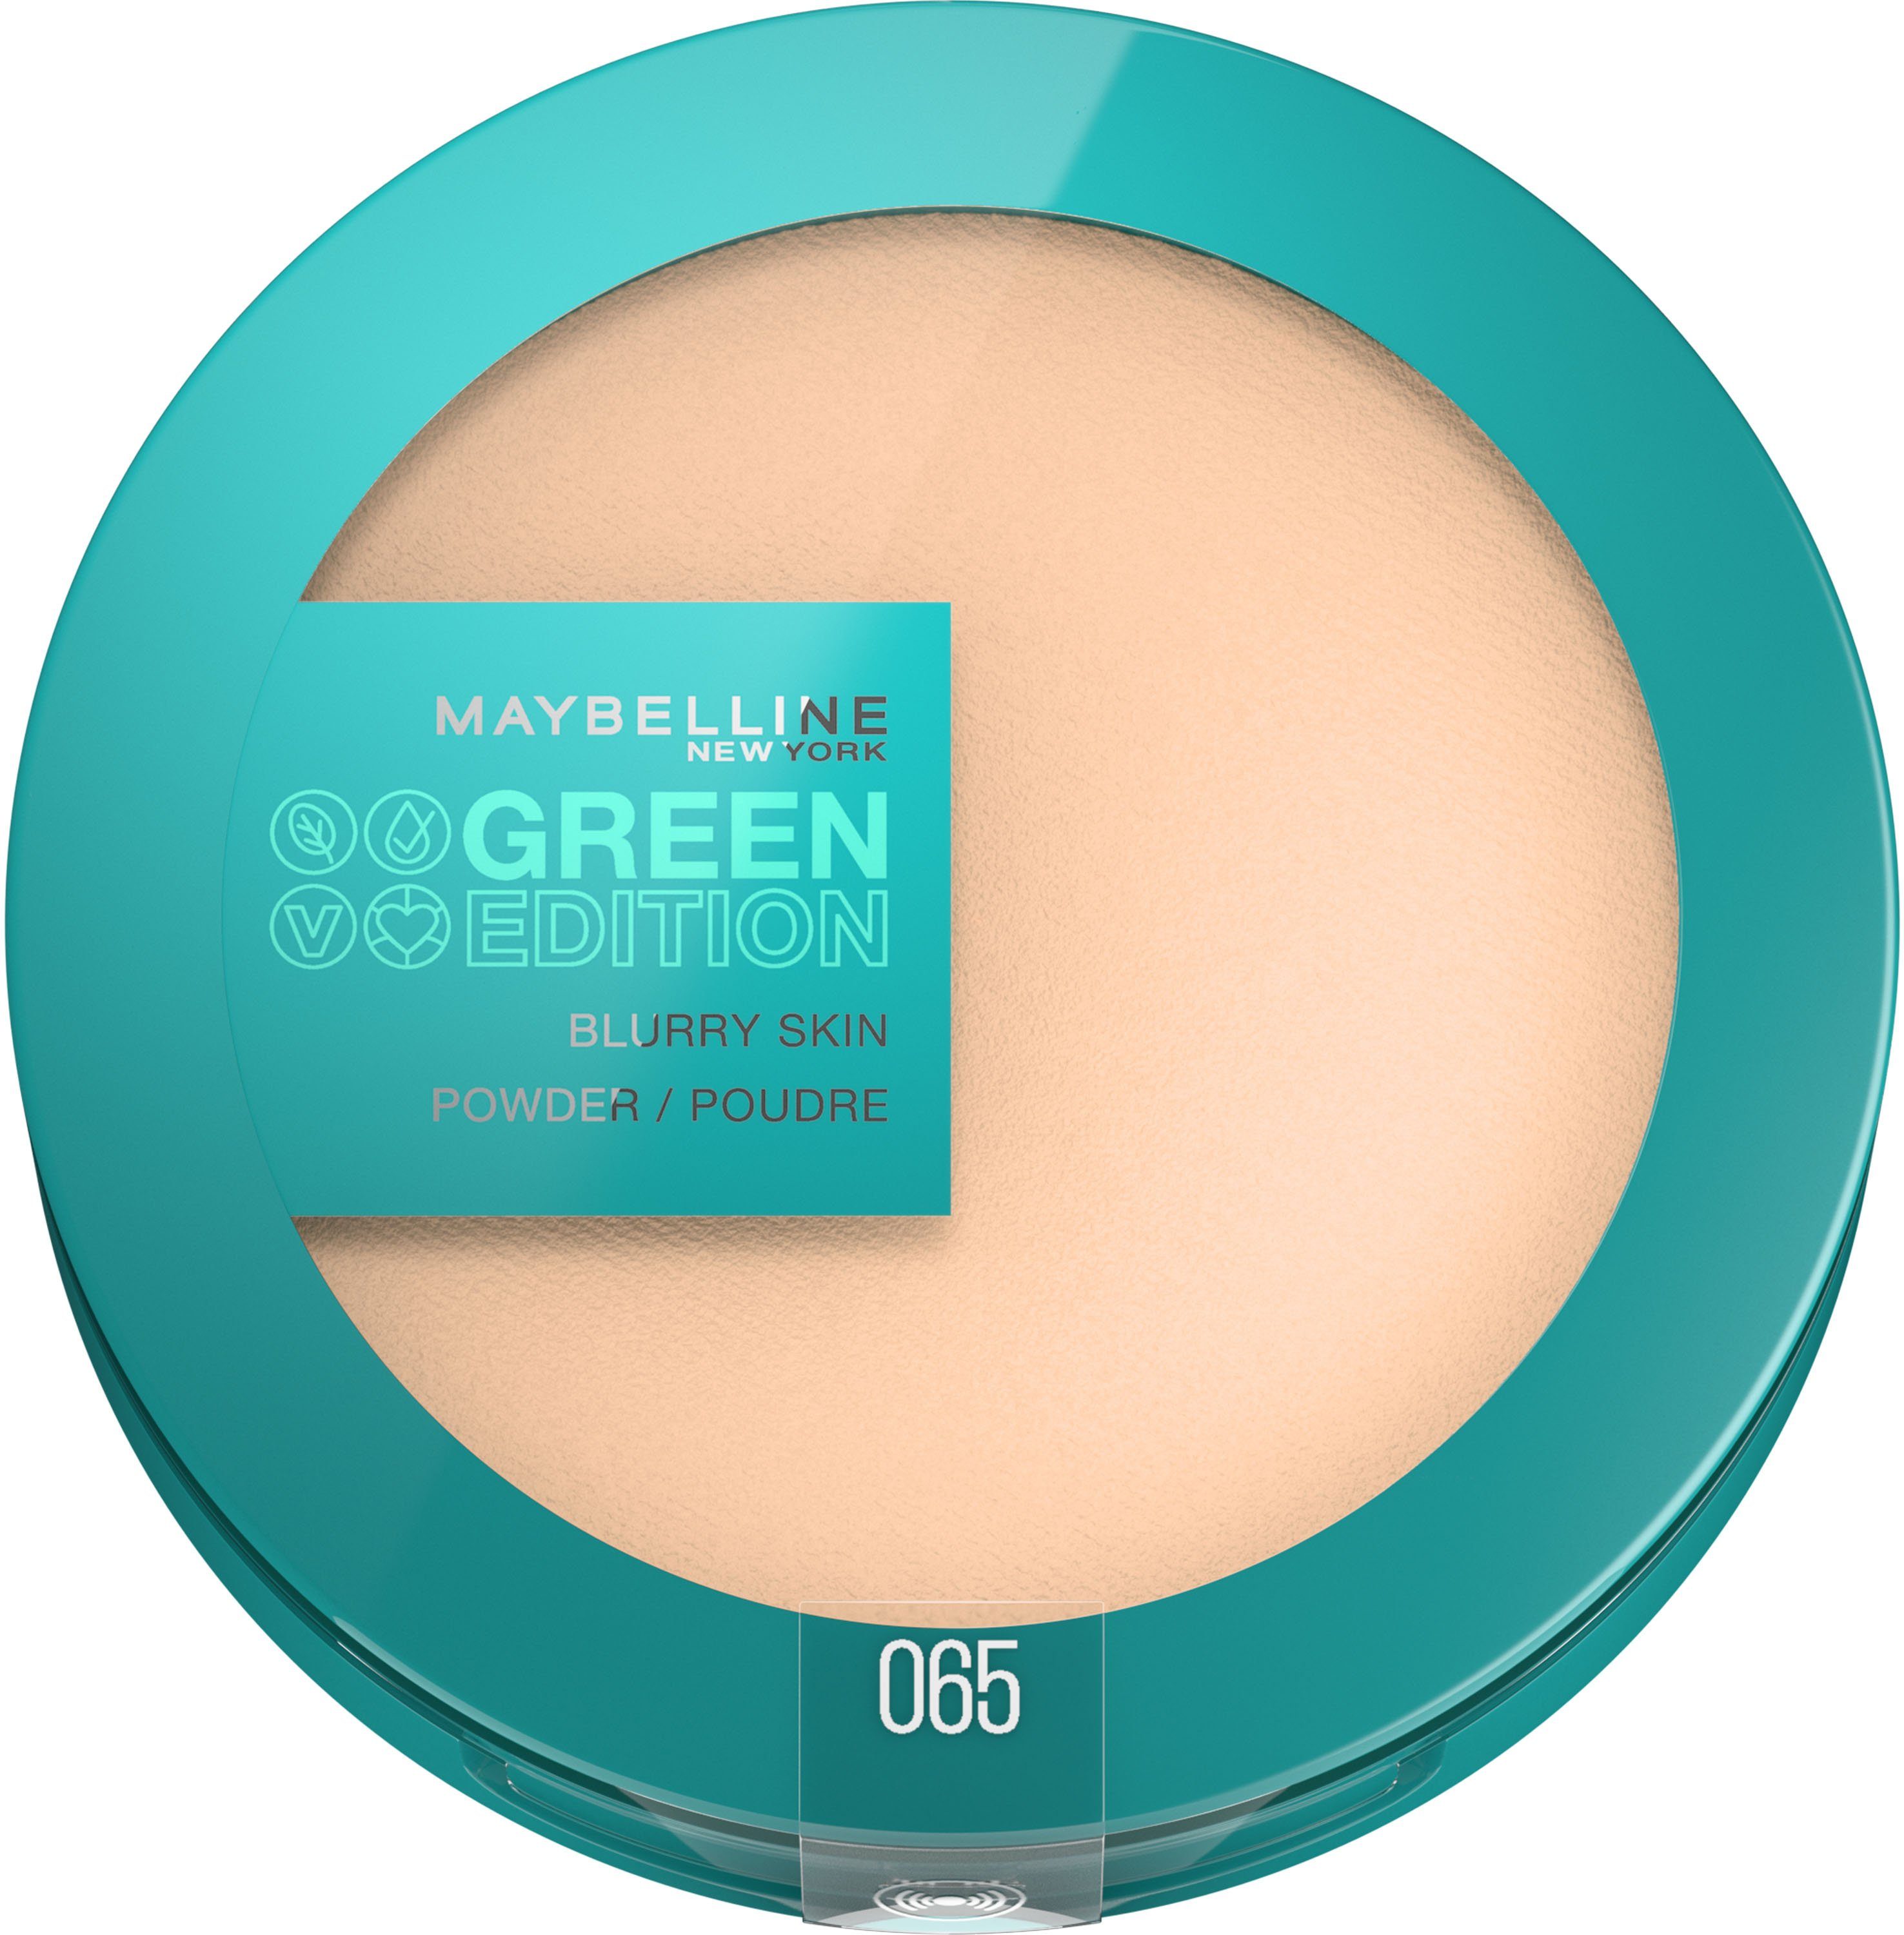 65 Green Puder YORK MAYBELLINE ED Edition POWDER Puder NEW GREEN